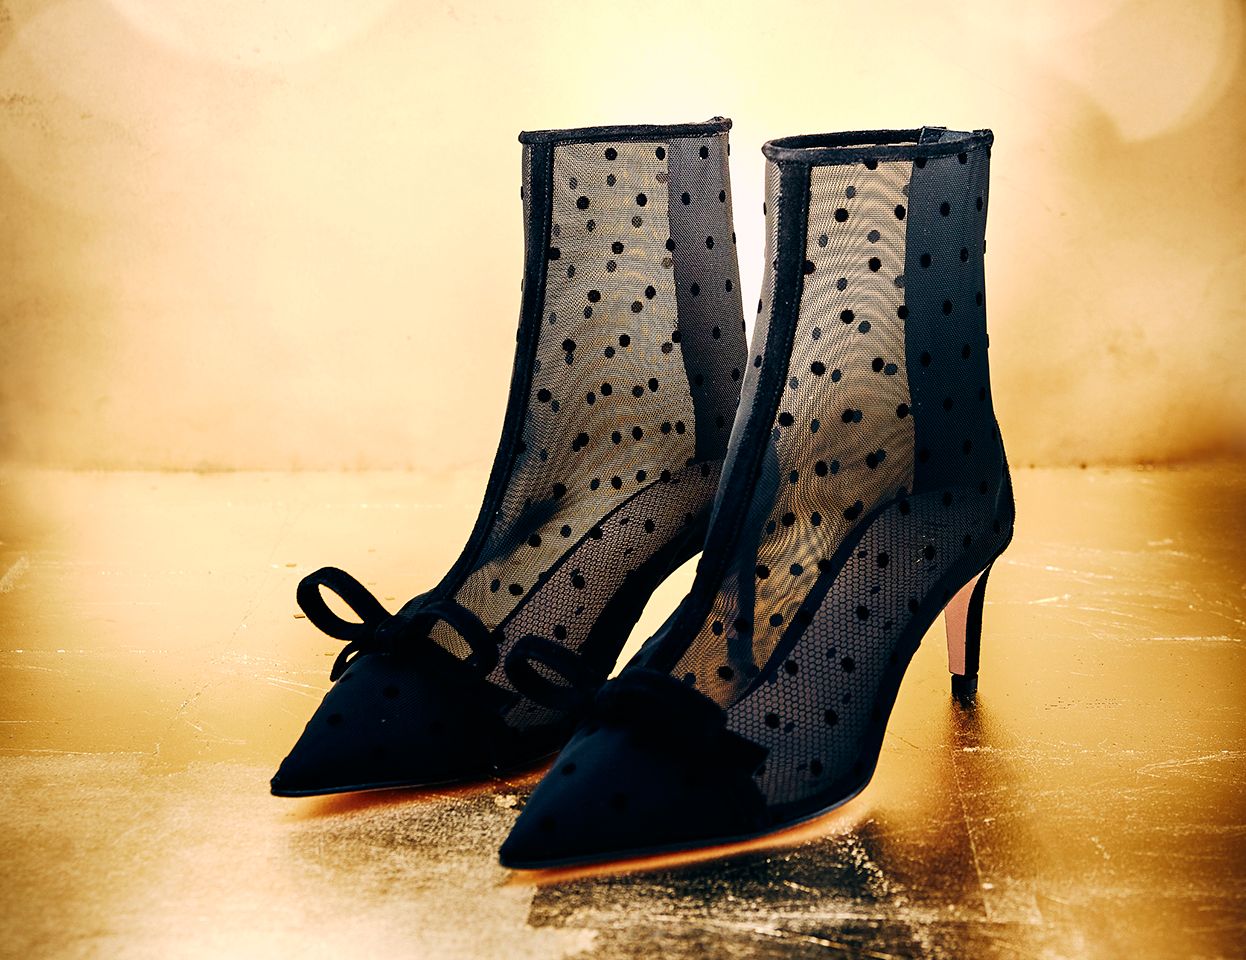 Dancing feet: introducing the party boot